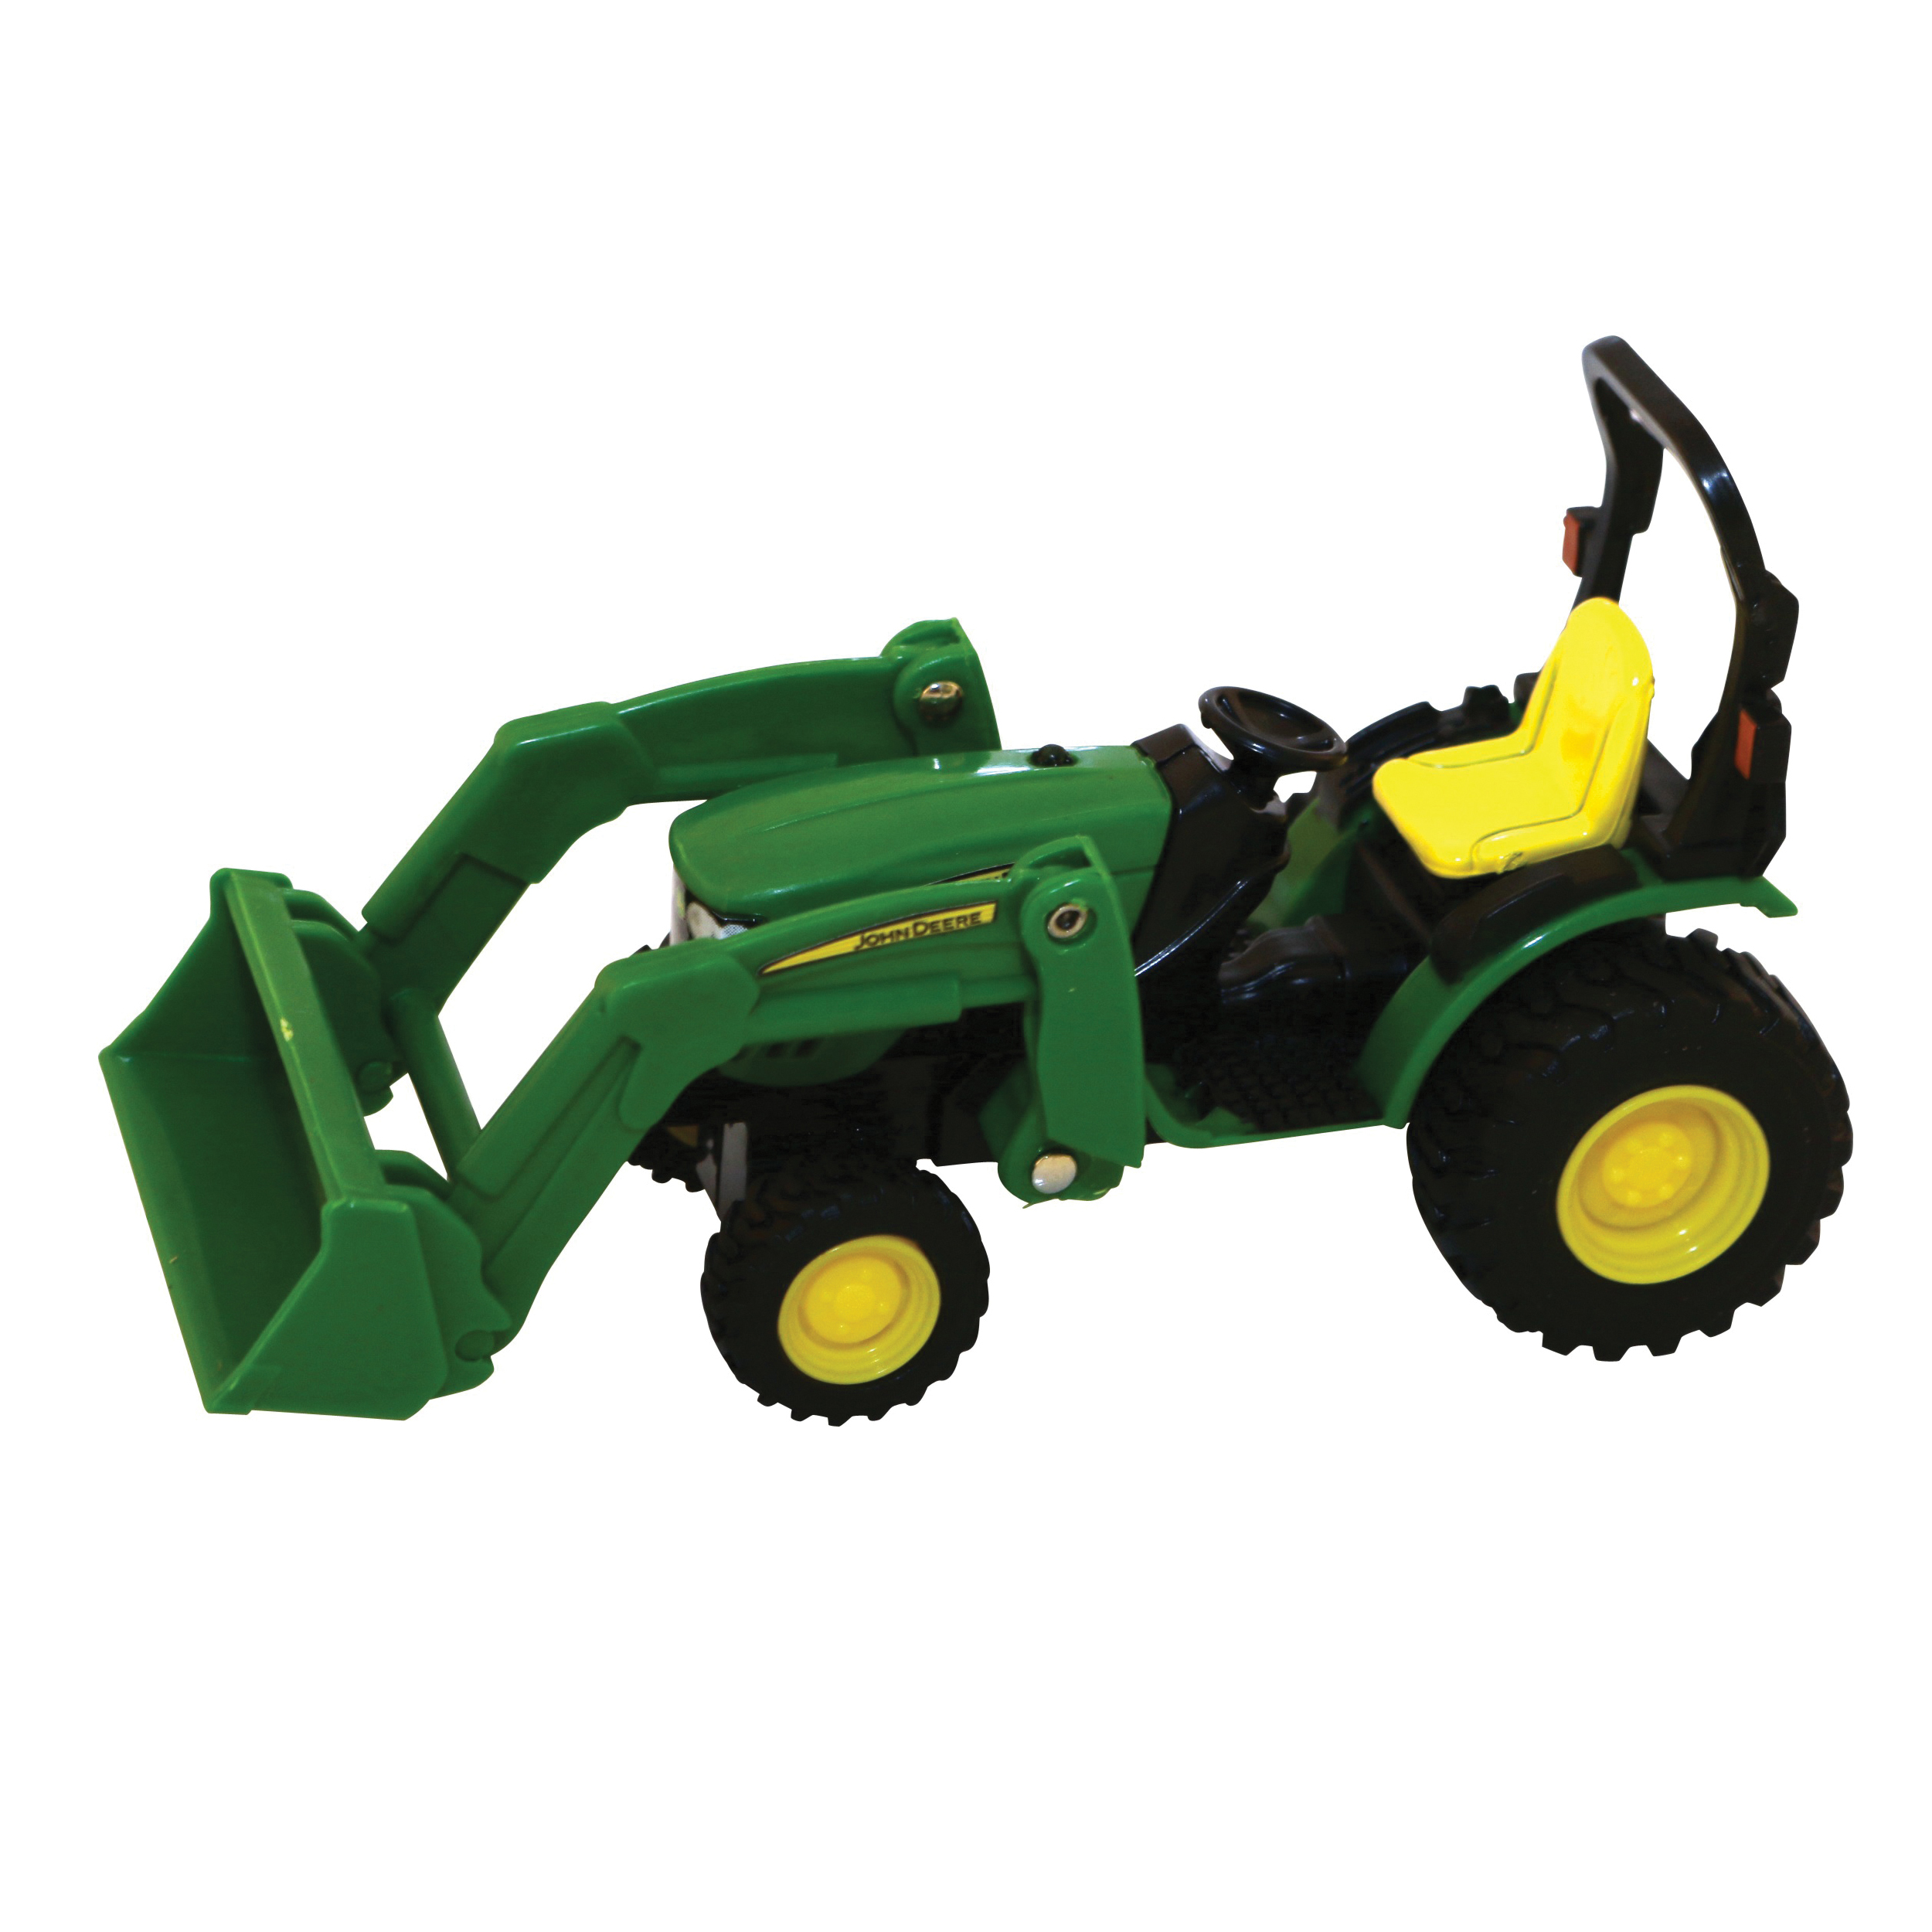 Series 46584 Toy Tractor